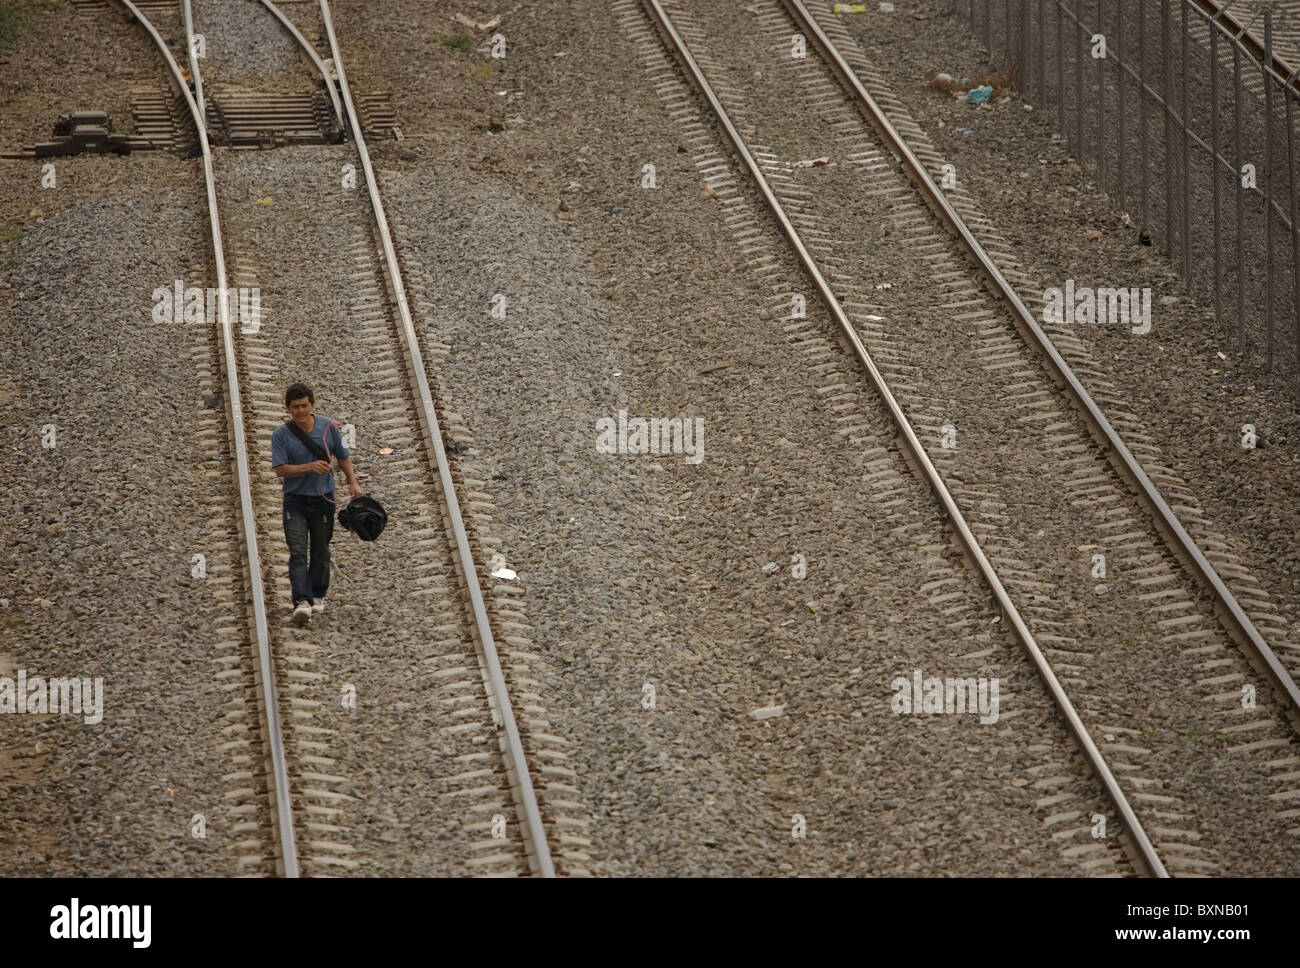 A Central American migrant traveling across Mexico to work in the United States walks along a railroad track in Mexico City Stock Photo